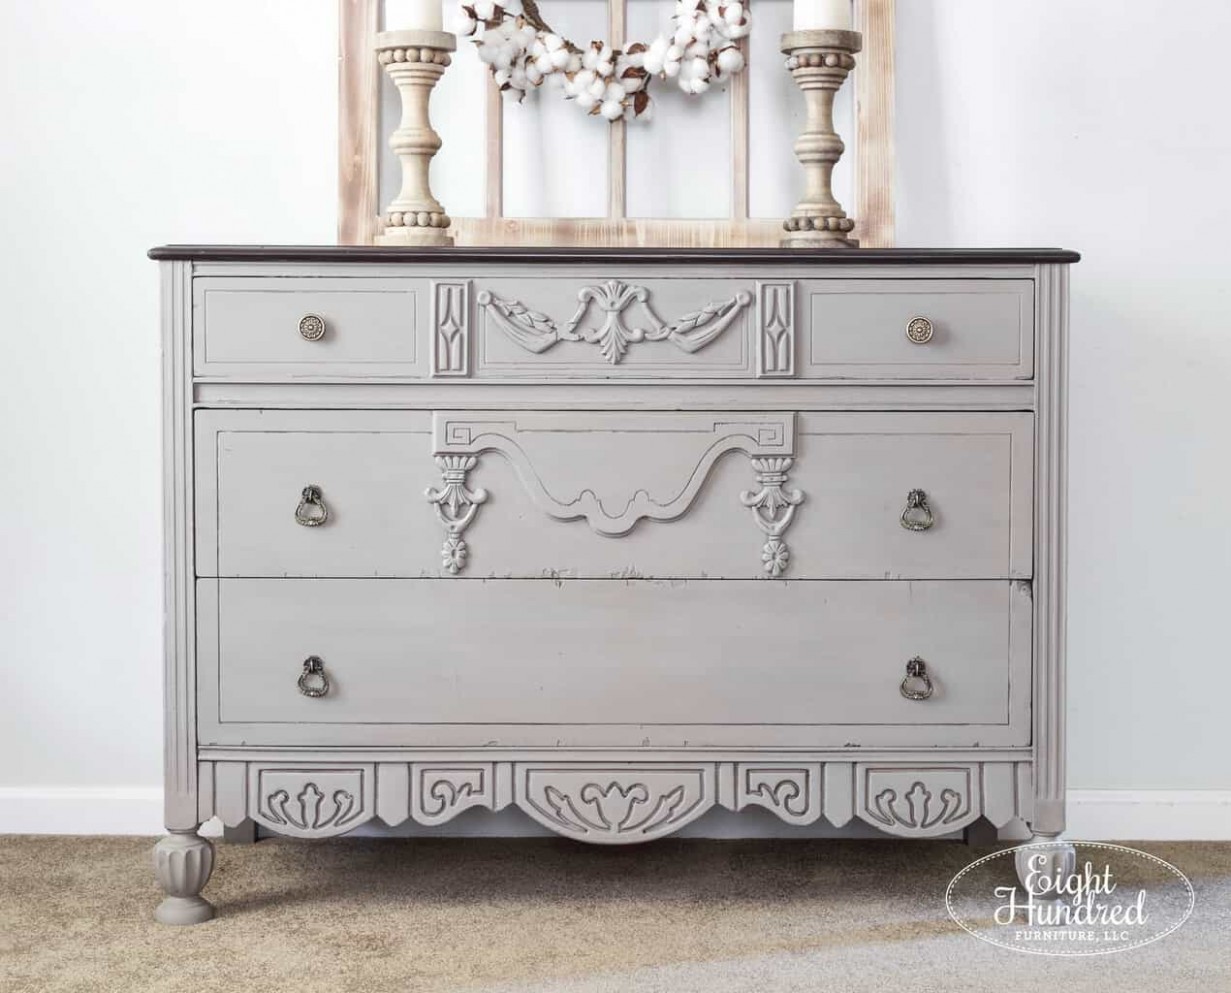 Repainting A Dresser In Chalk Paint® Eight Hundred Furniture Can You Paint Over Gl With Chalk Paint